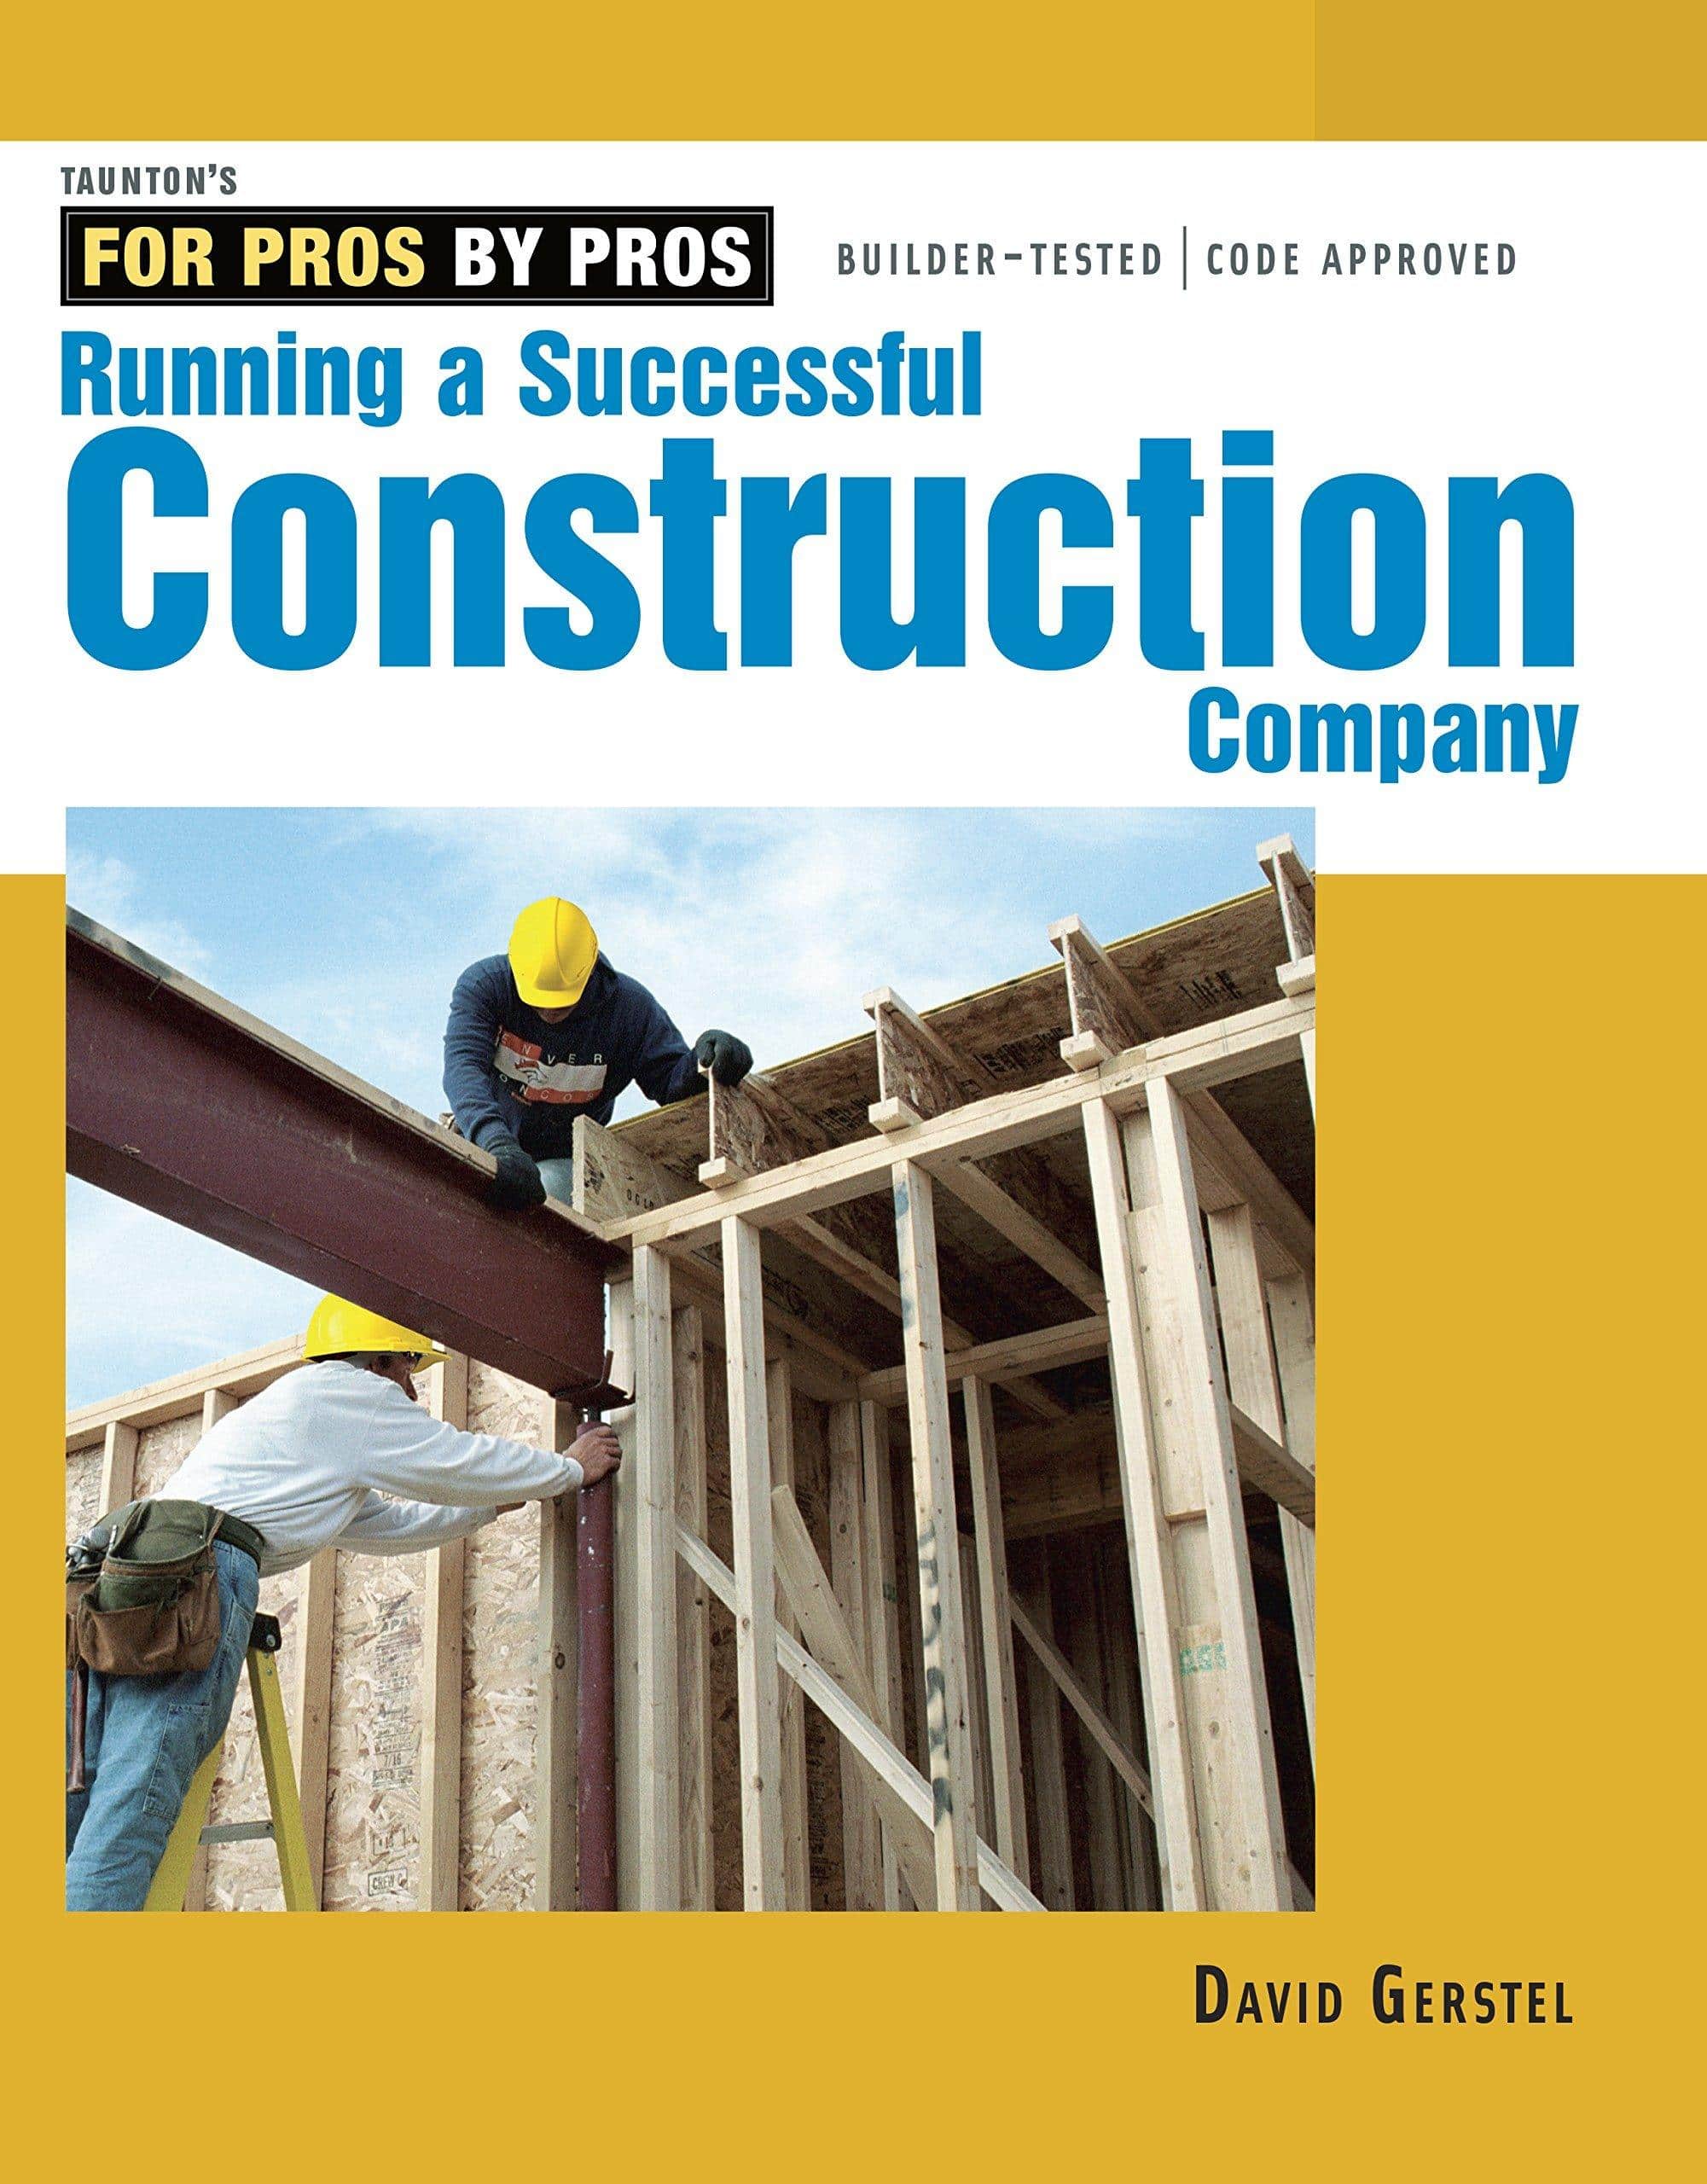 Running a Successful Construction Company (Revised, Updated) - SureShot Books Publishing LLC